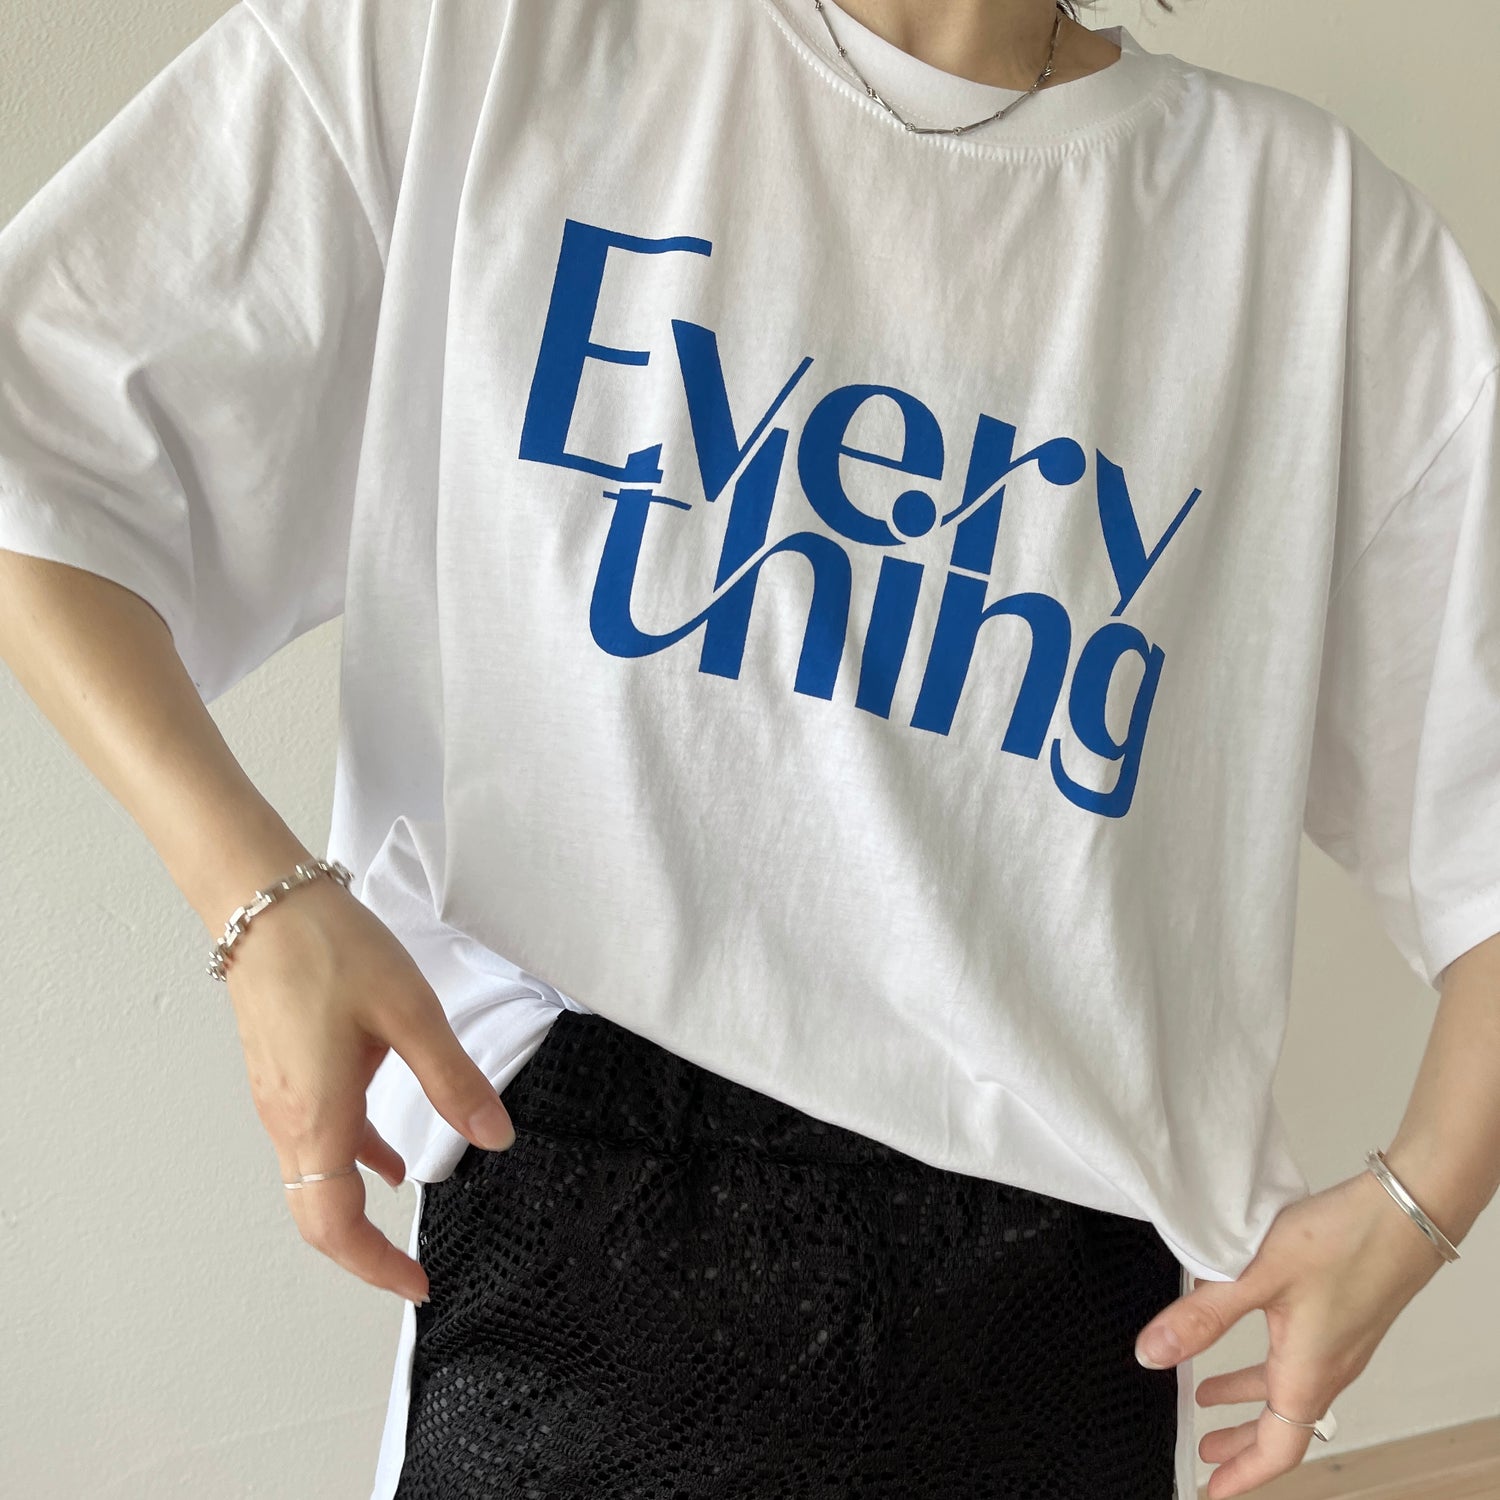 "EVERY THING" / ivory